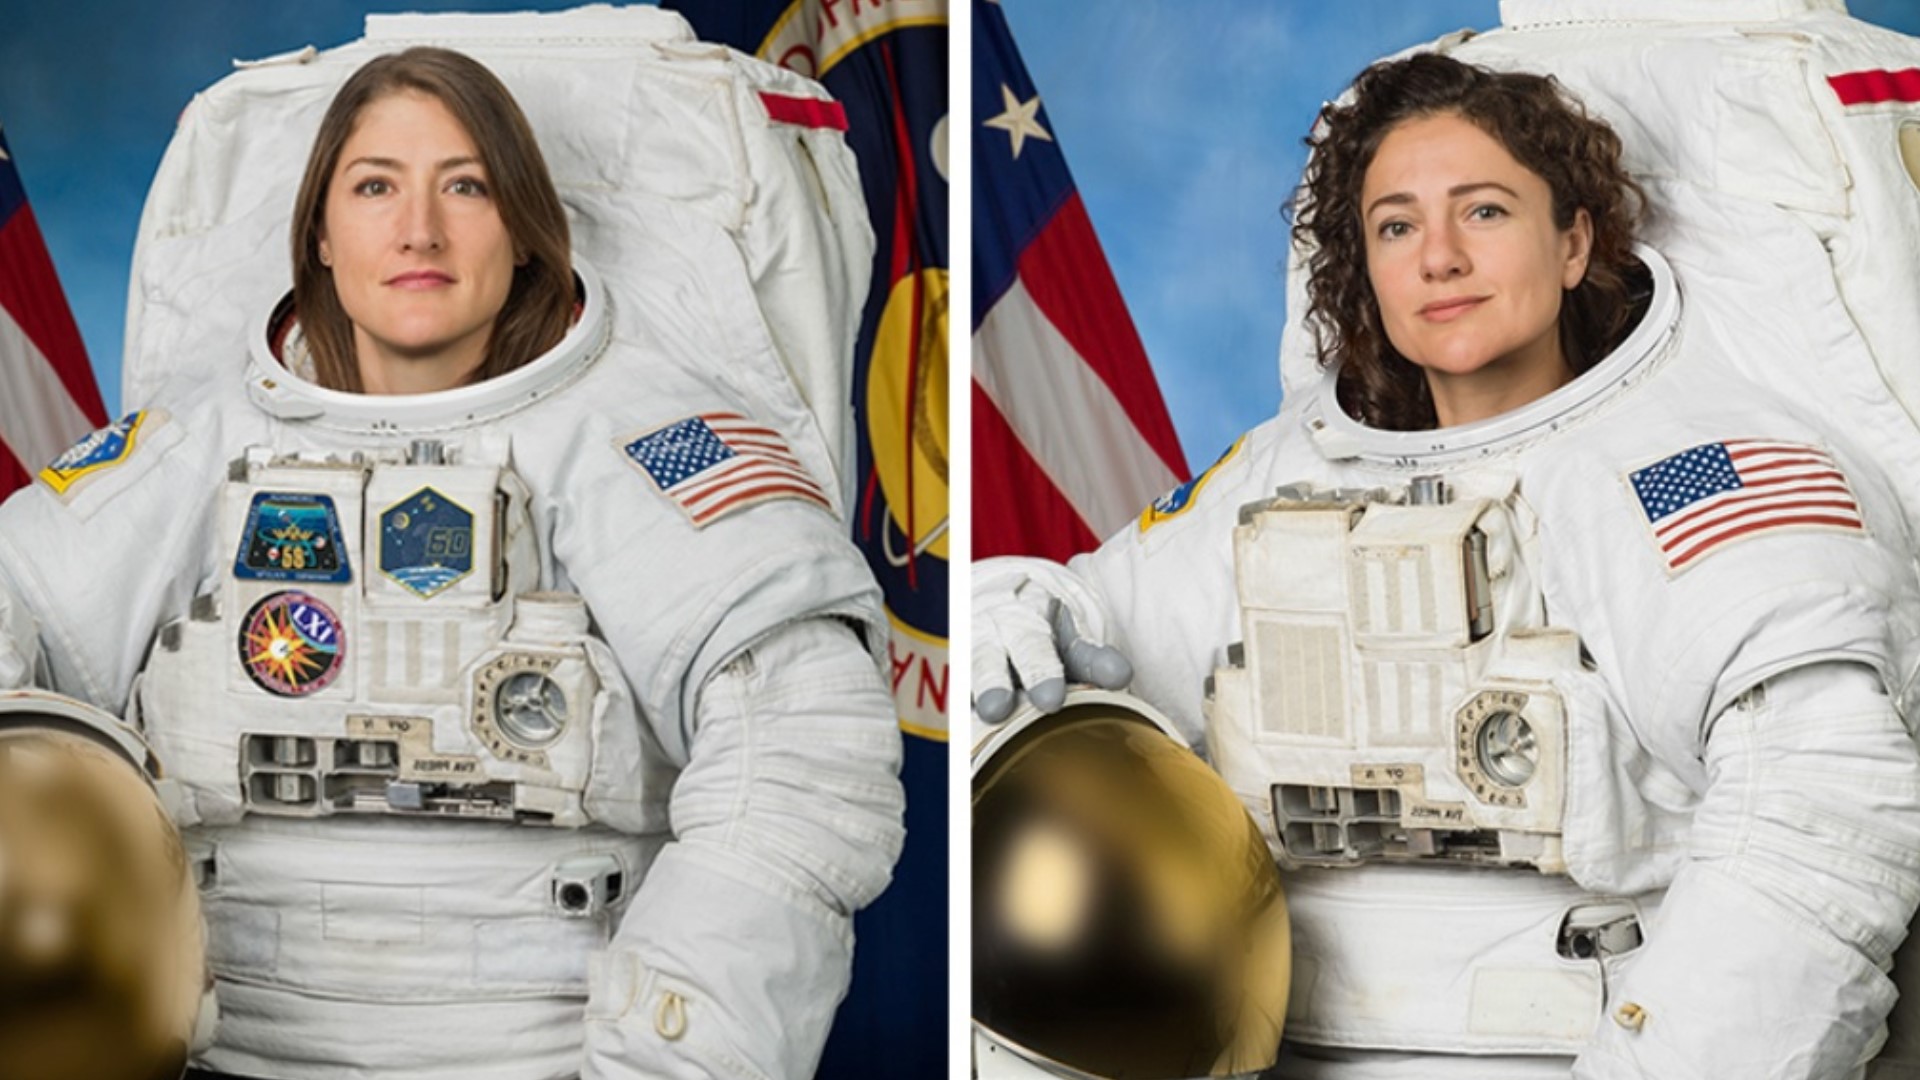 There have been 420 spacewalks and at least one man has taken part in every one of them. But astronauts Christina Koch and Jessica Meir are about to change history.